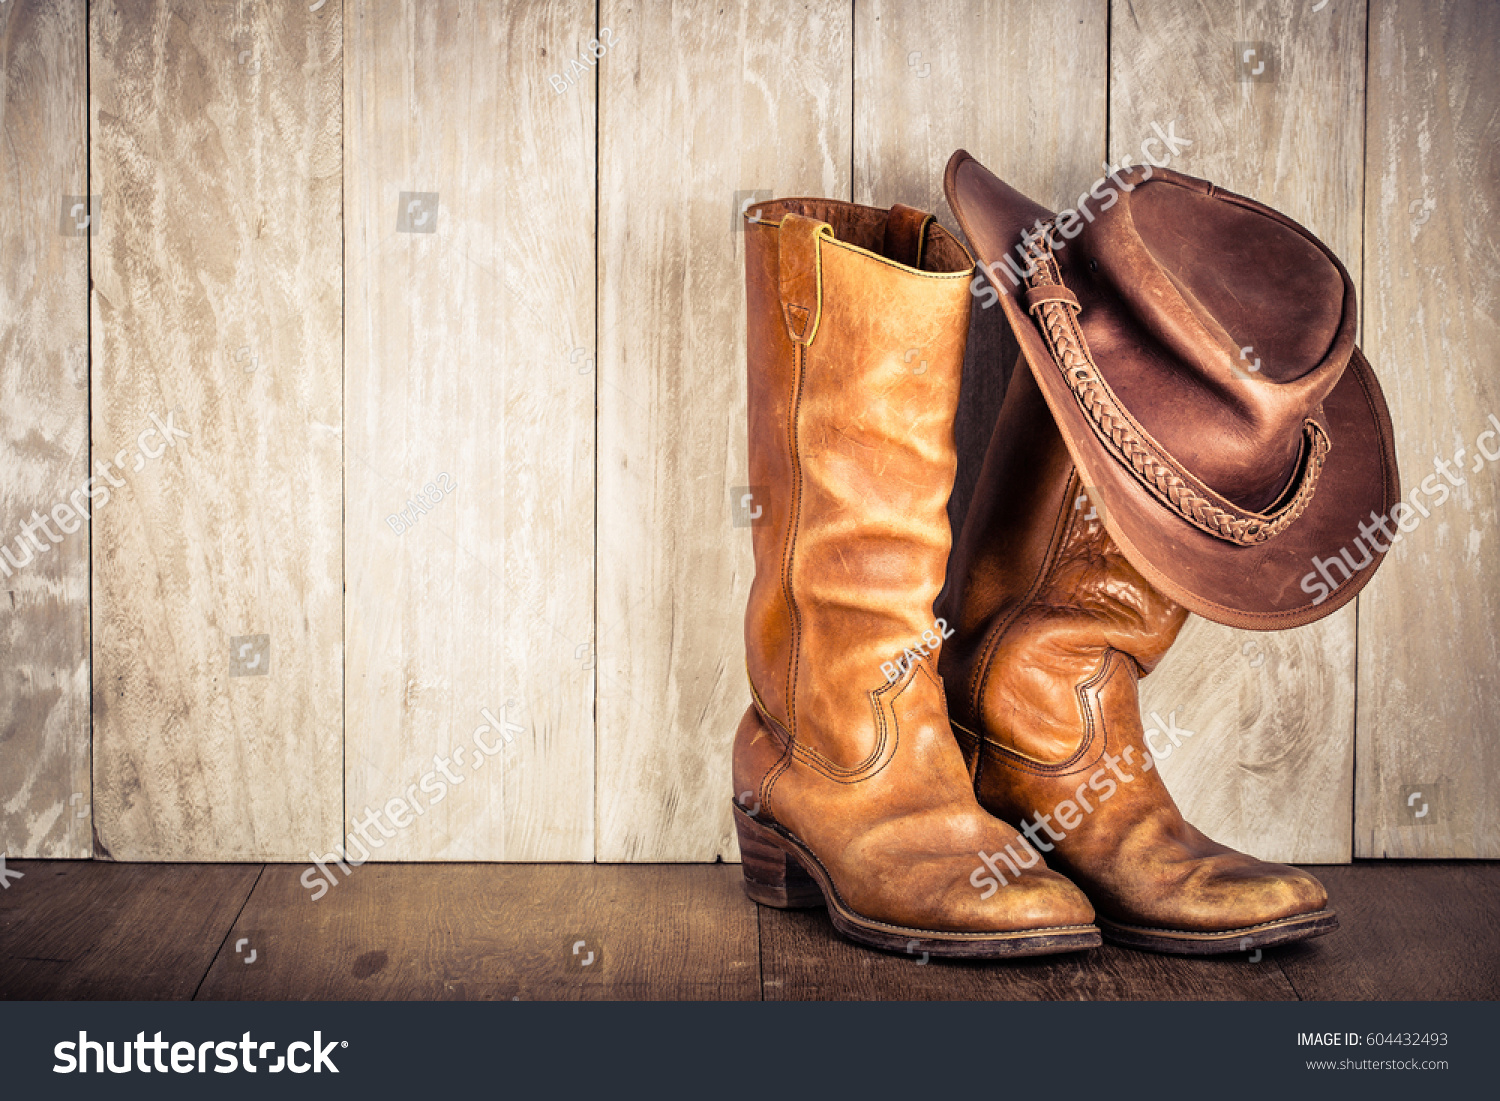 Wild West retro leather cowboy hat and old boots. Vintage style filtered photo #604432493